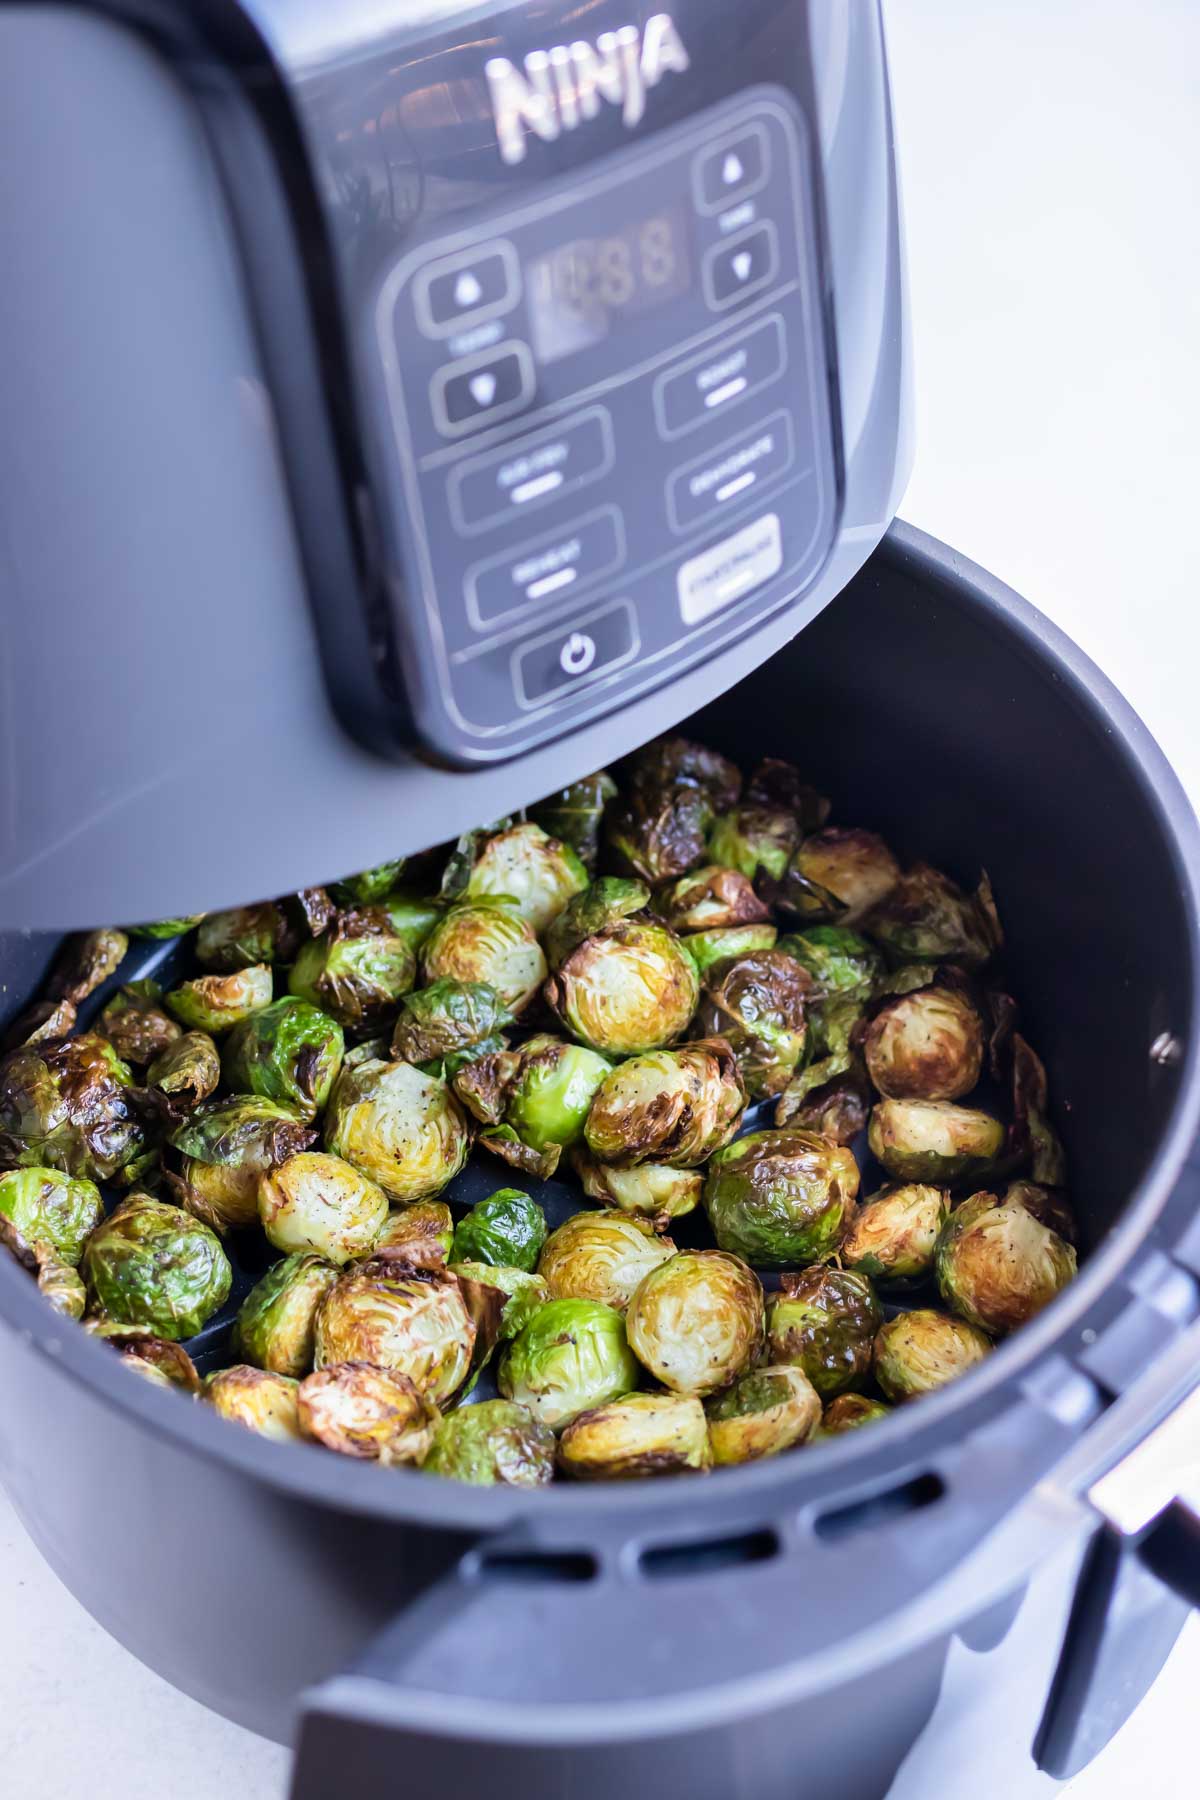 Brussels sprouts are roasted in the air fryer for a crispy and healthy side dish.